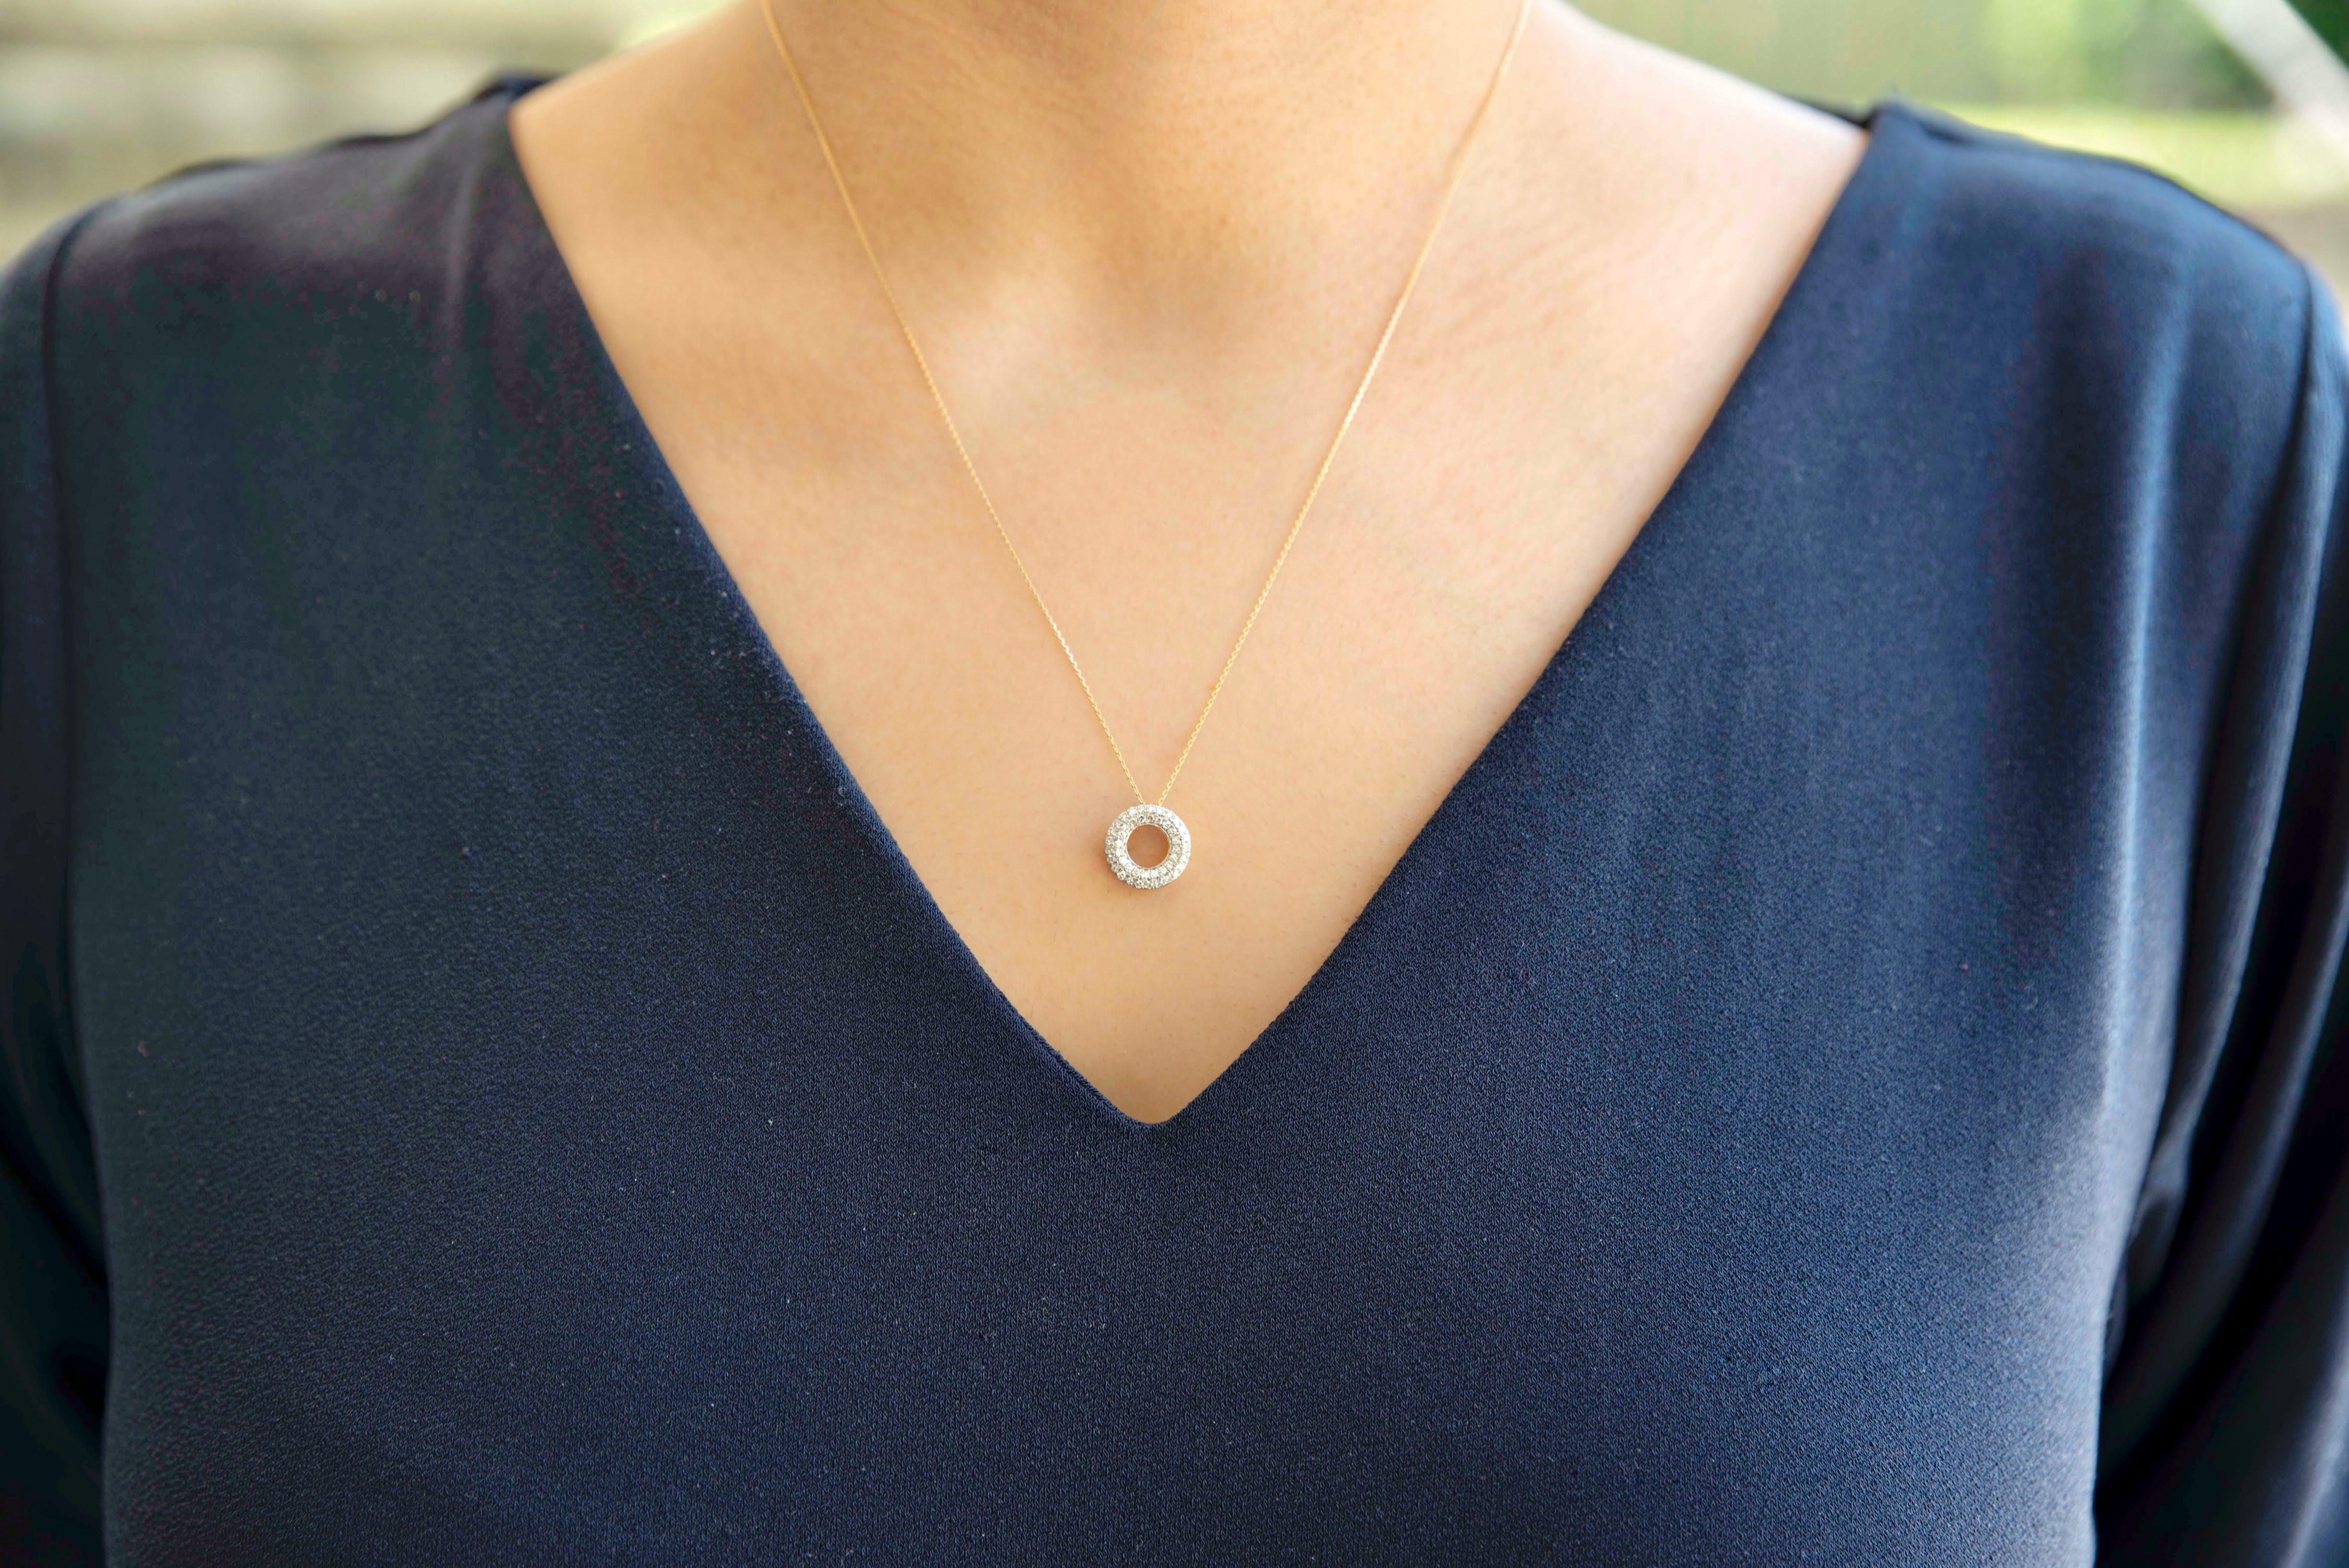 10K Yellow Gold Open Circle Diamond Pendant. Wear it alone or a layering necklace.

Chain length 18